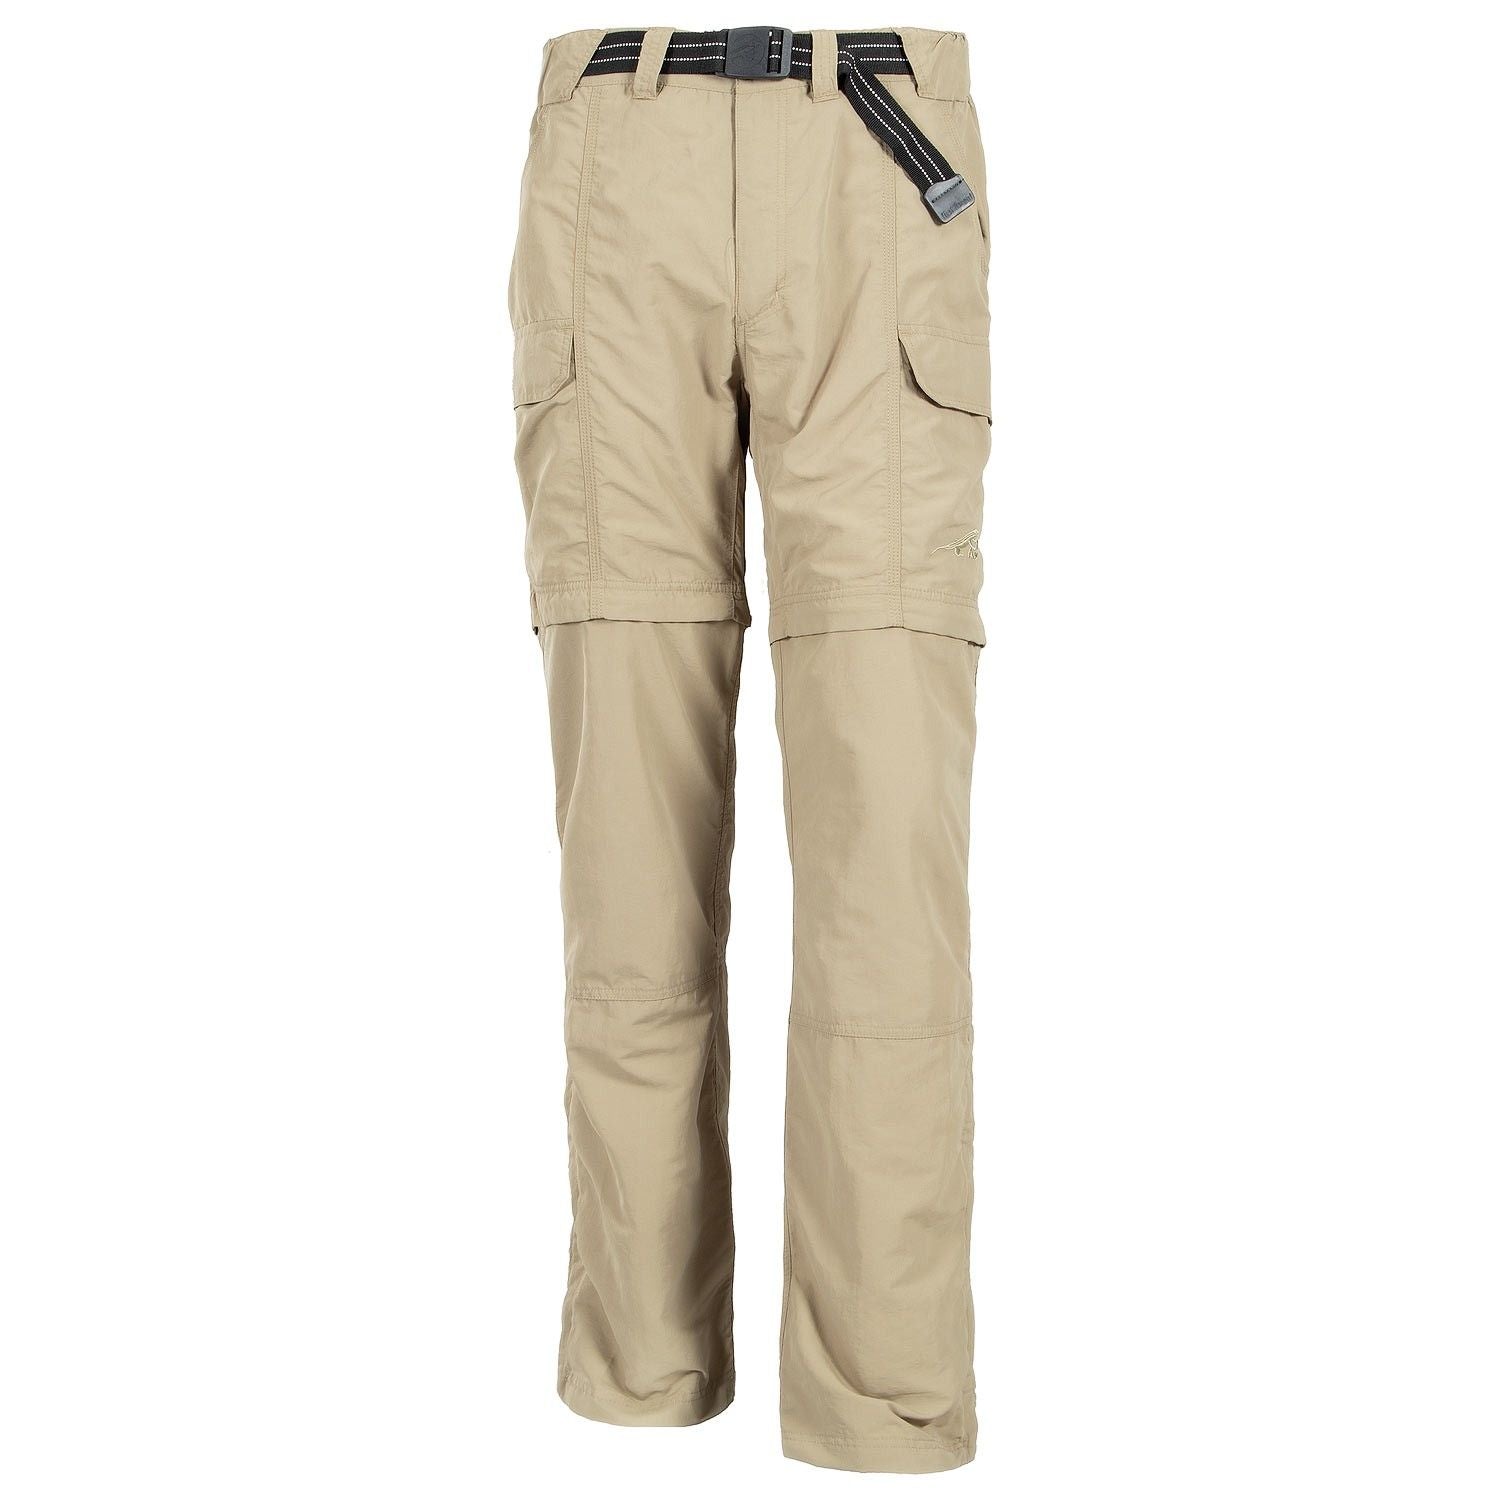 Men's Work Cargo Pants Climbing Tactical Hiking Multi-Pockets Quick-dry  Outdoor | eBay